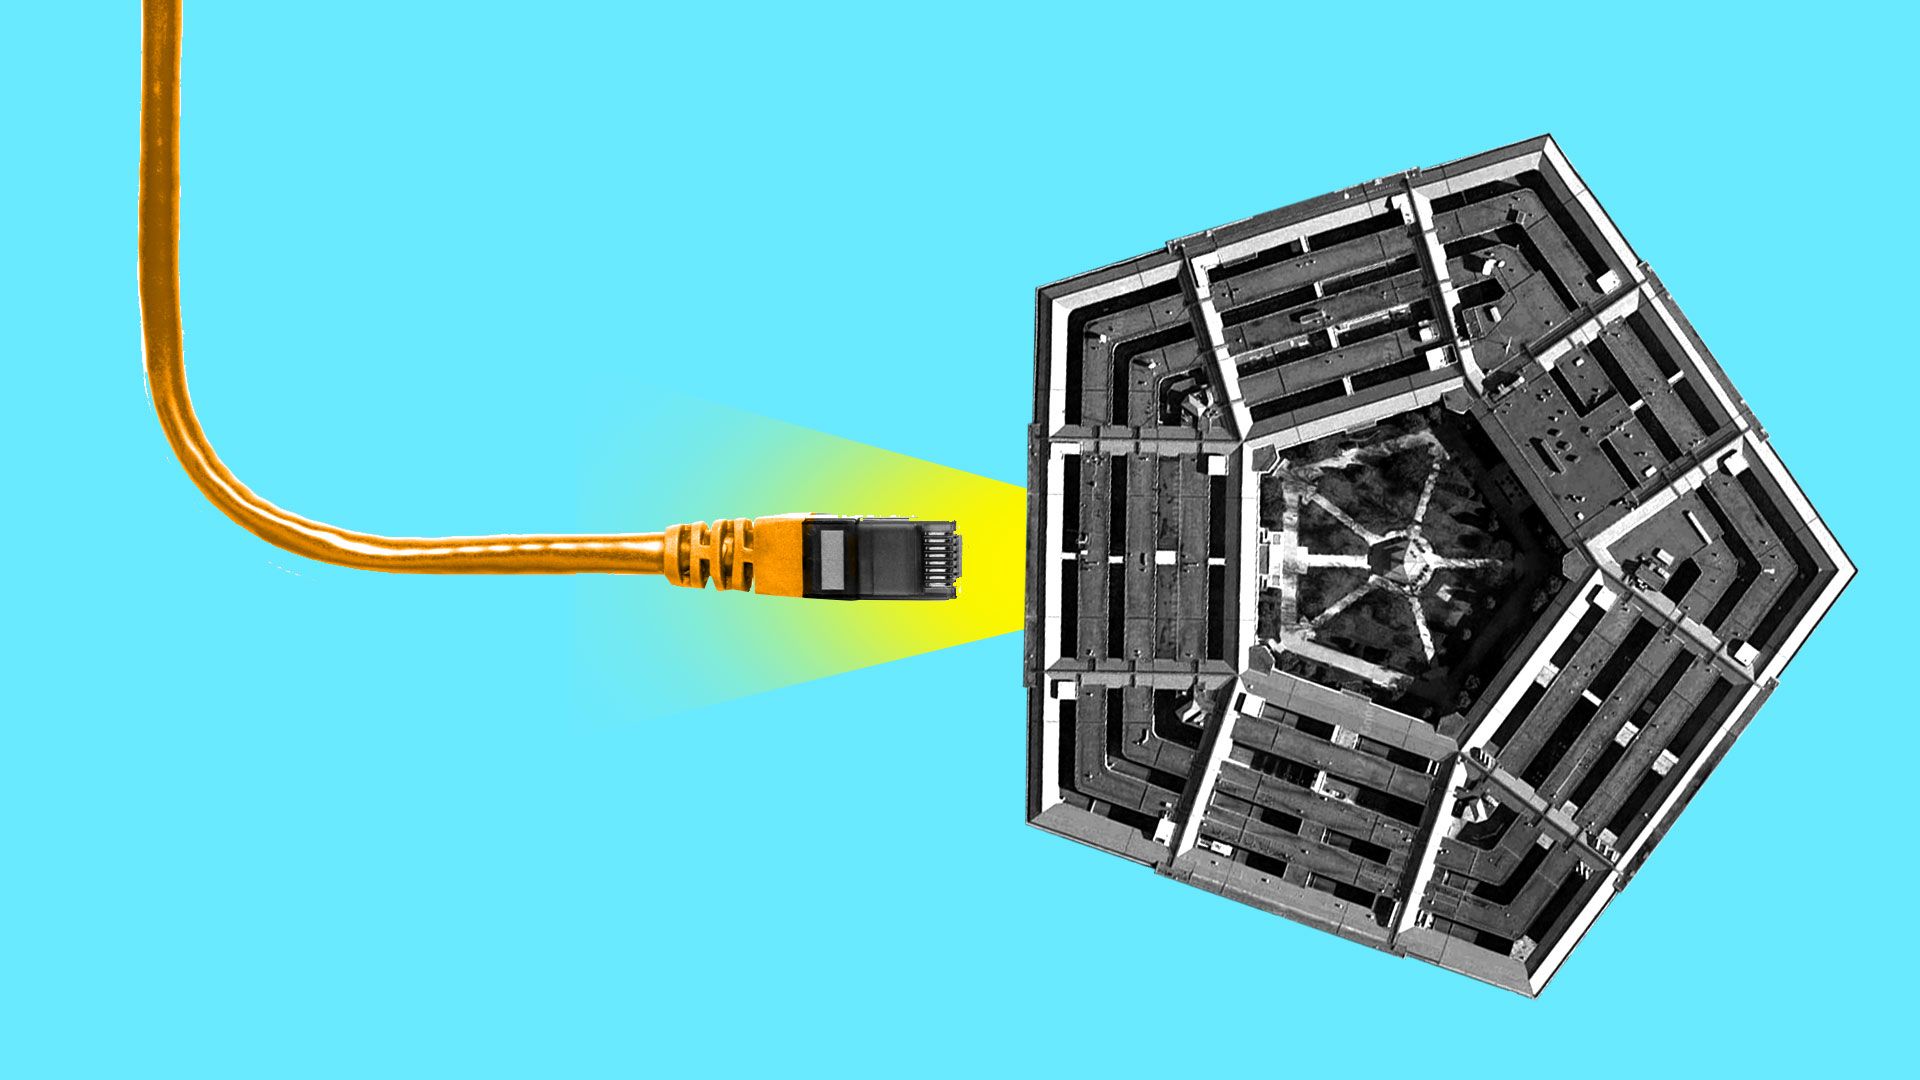 Illustration of the Pentagon from above with a USB stick plugging in